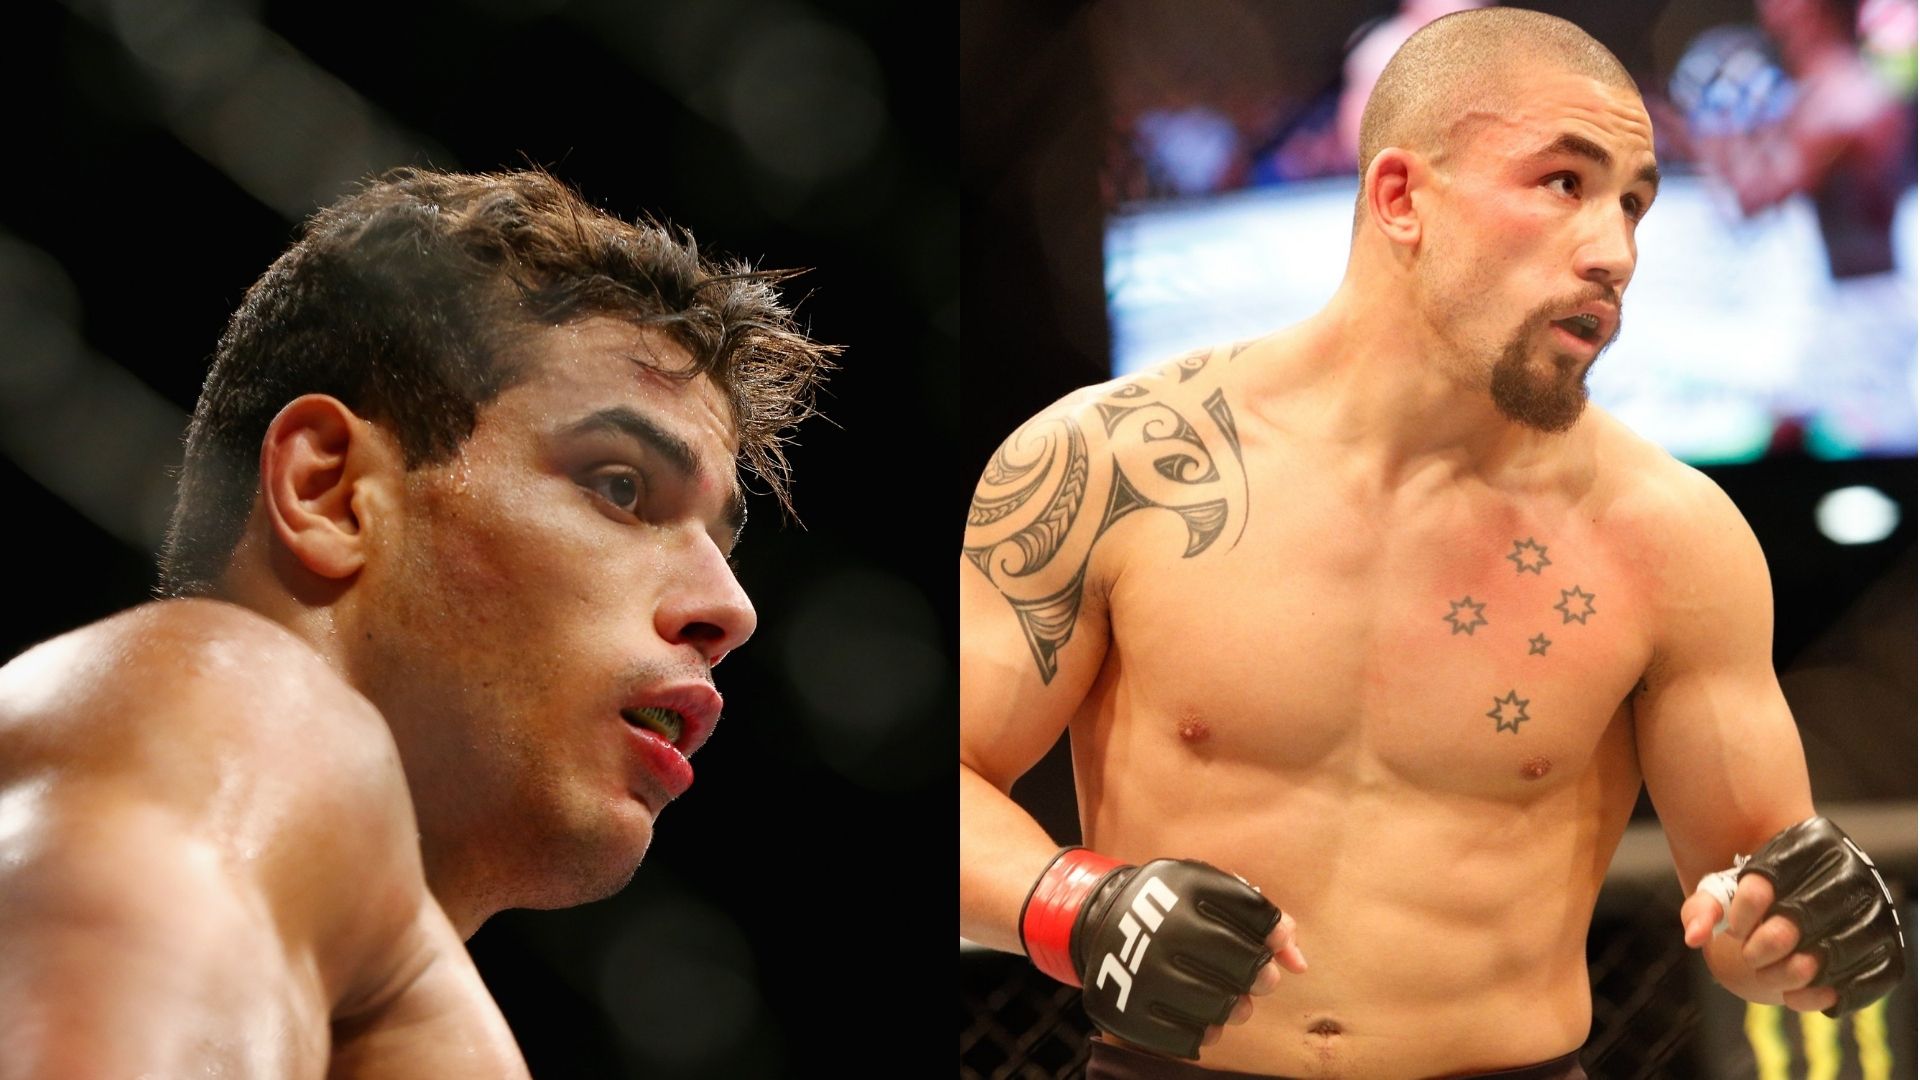 Robert Whittaker could be the next fight for Paulo Costa